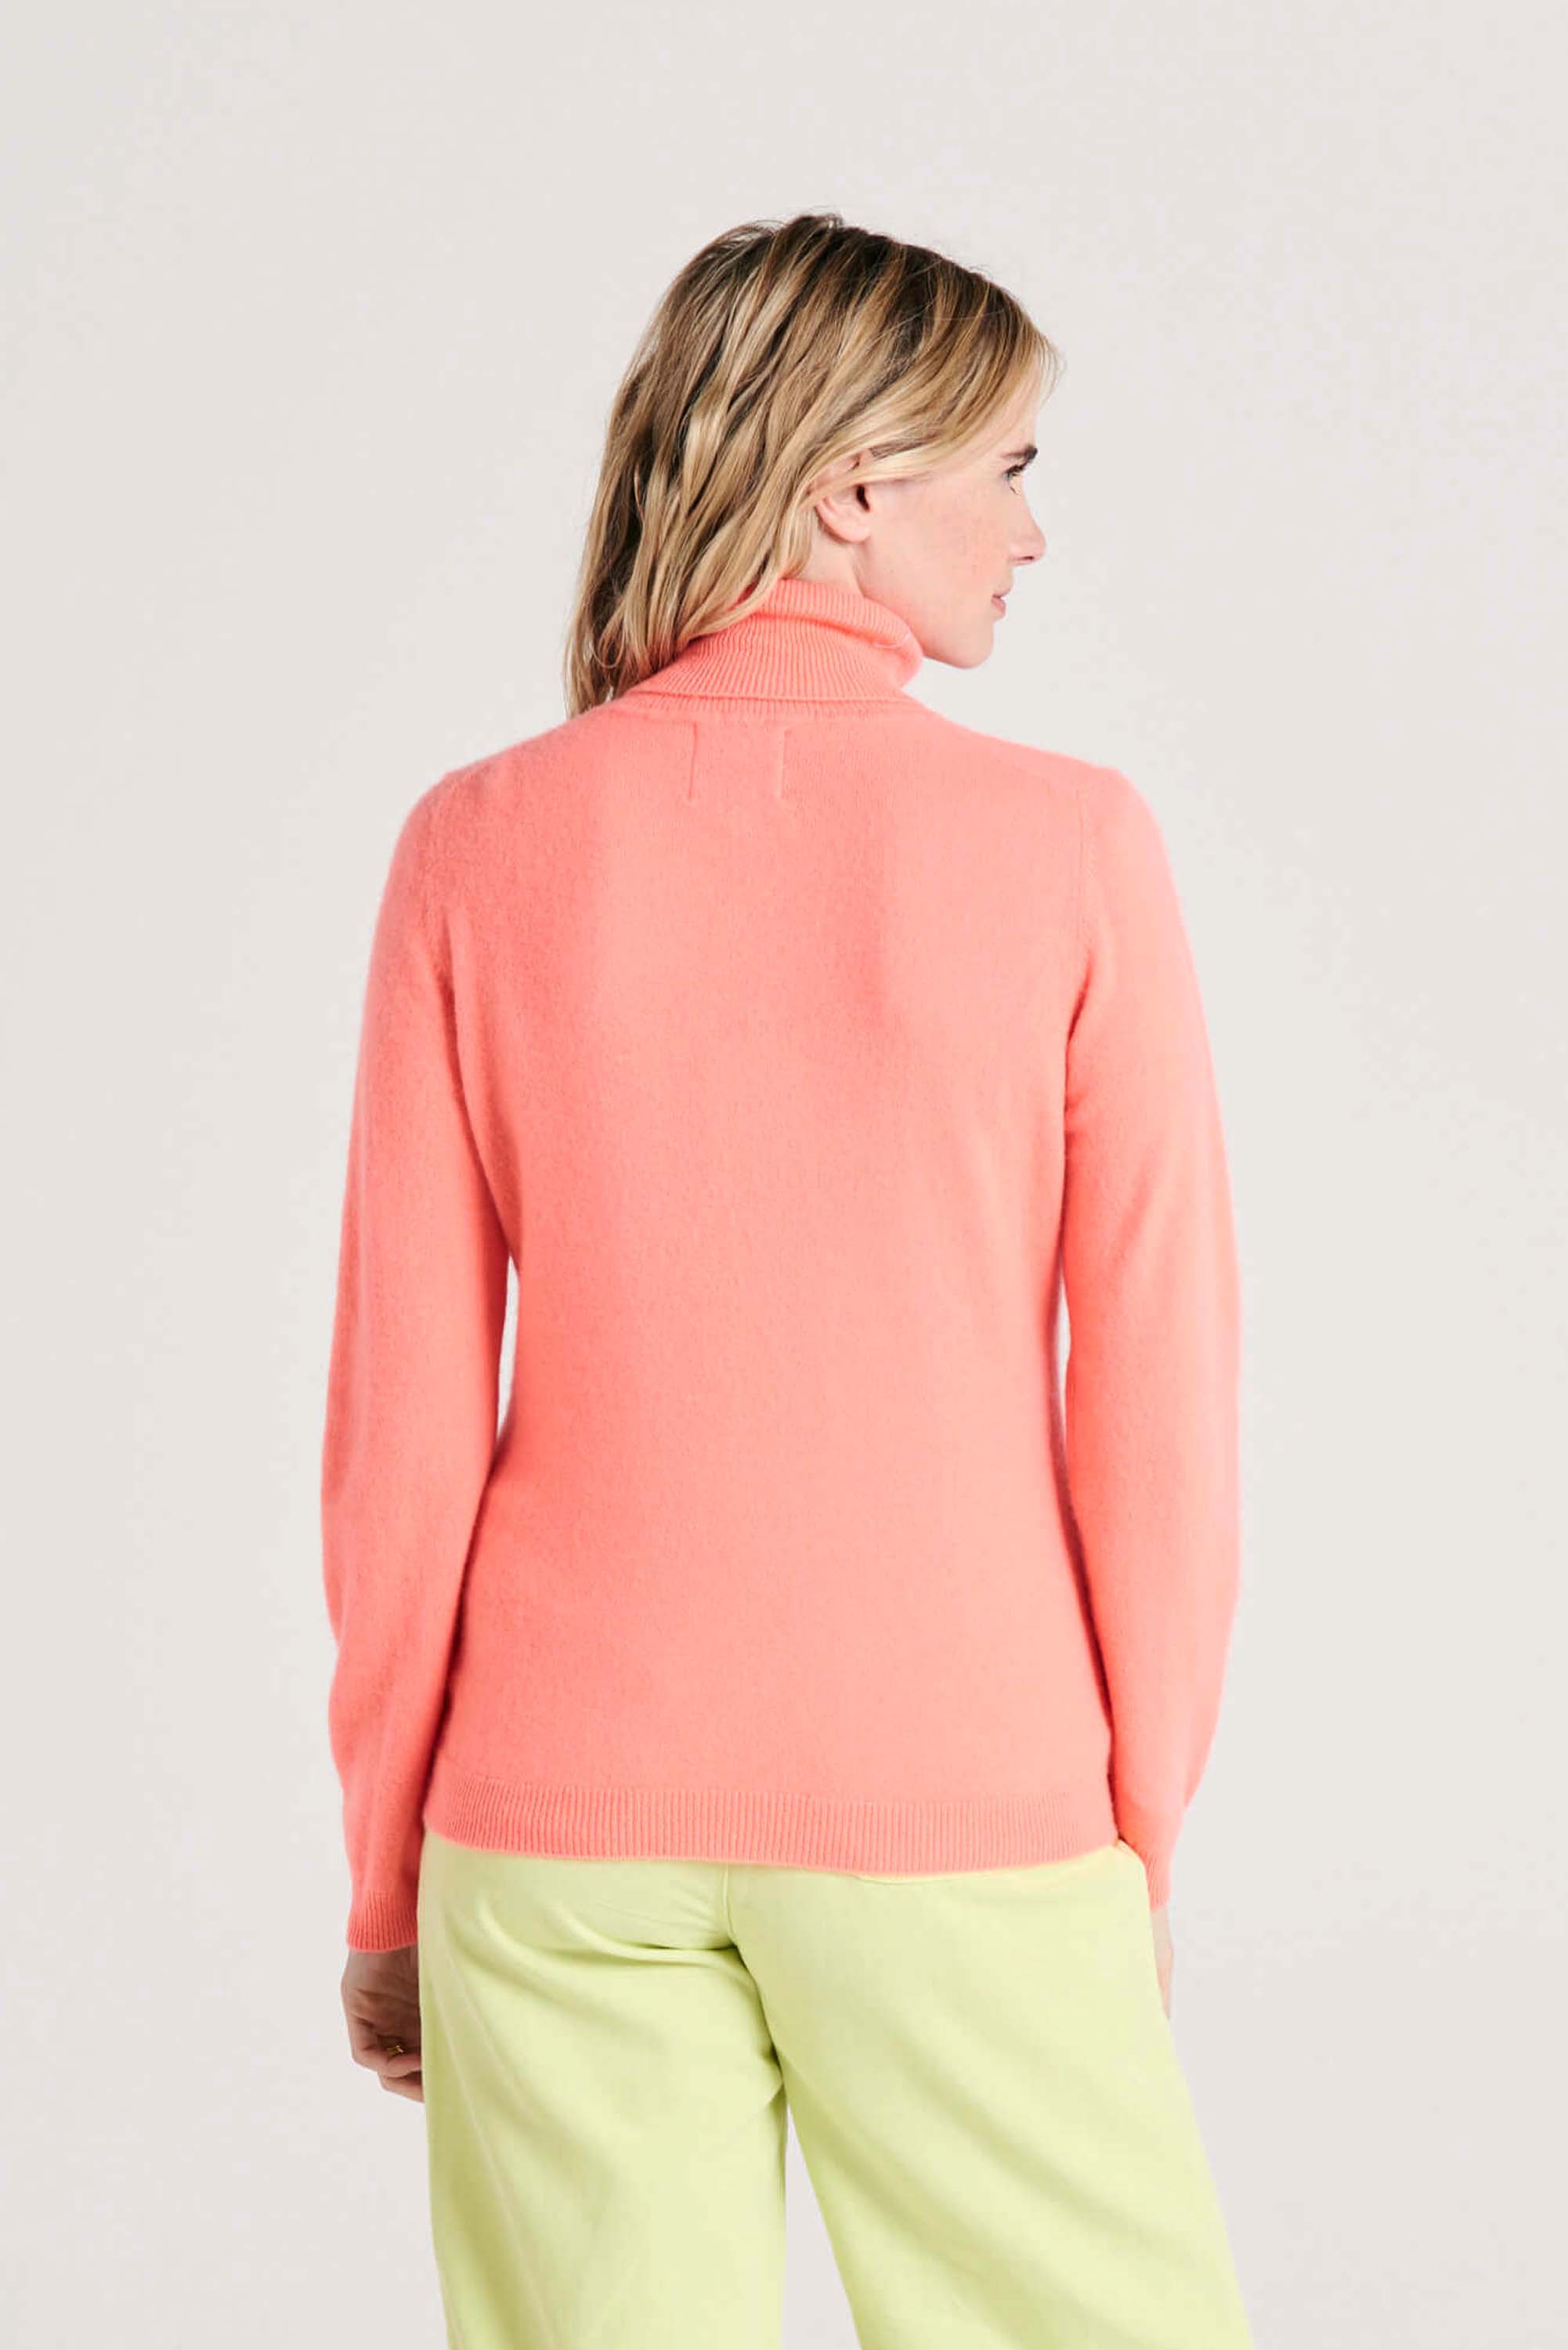 Blonde female model wearing Jumper1234 neon coral cashmere roll neck facing away from the camera